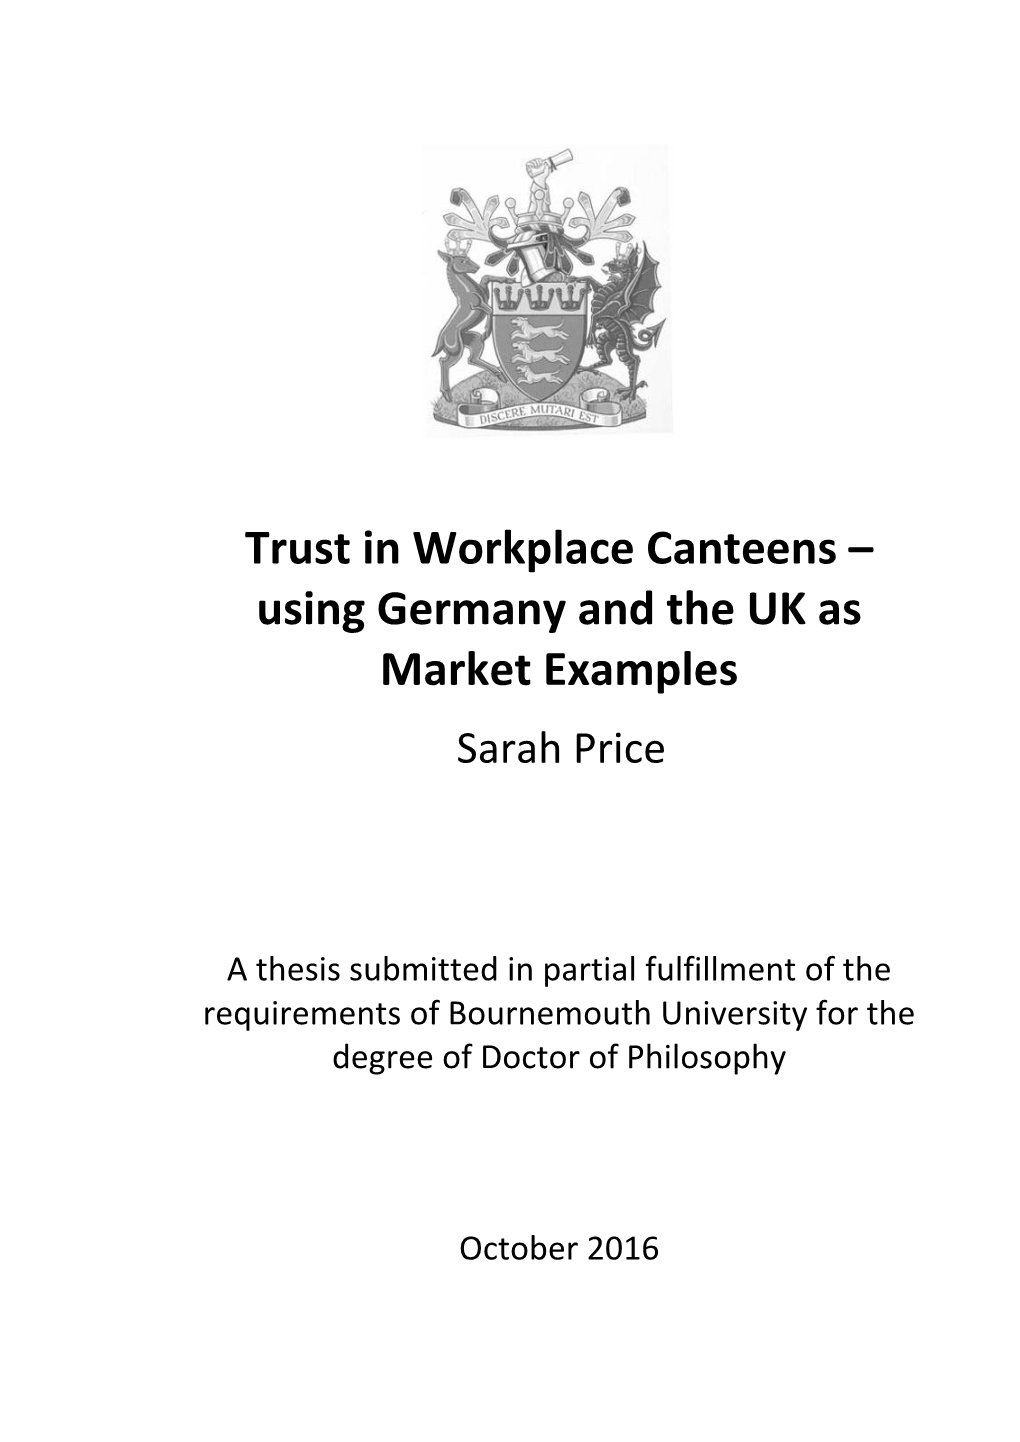 Trust in Workplace Canteens – Using Germany and the UK As Market